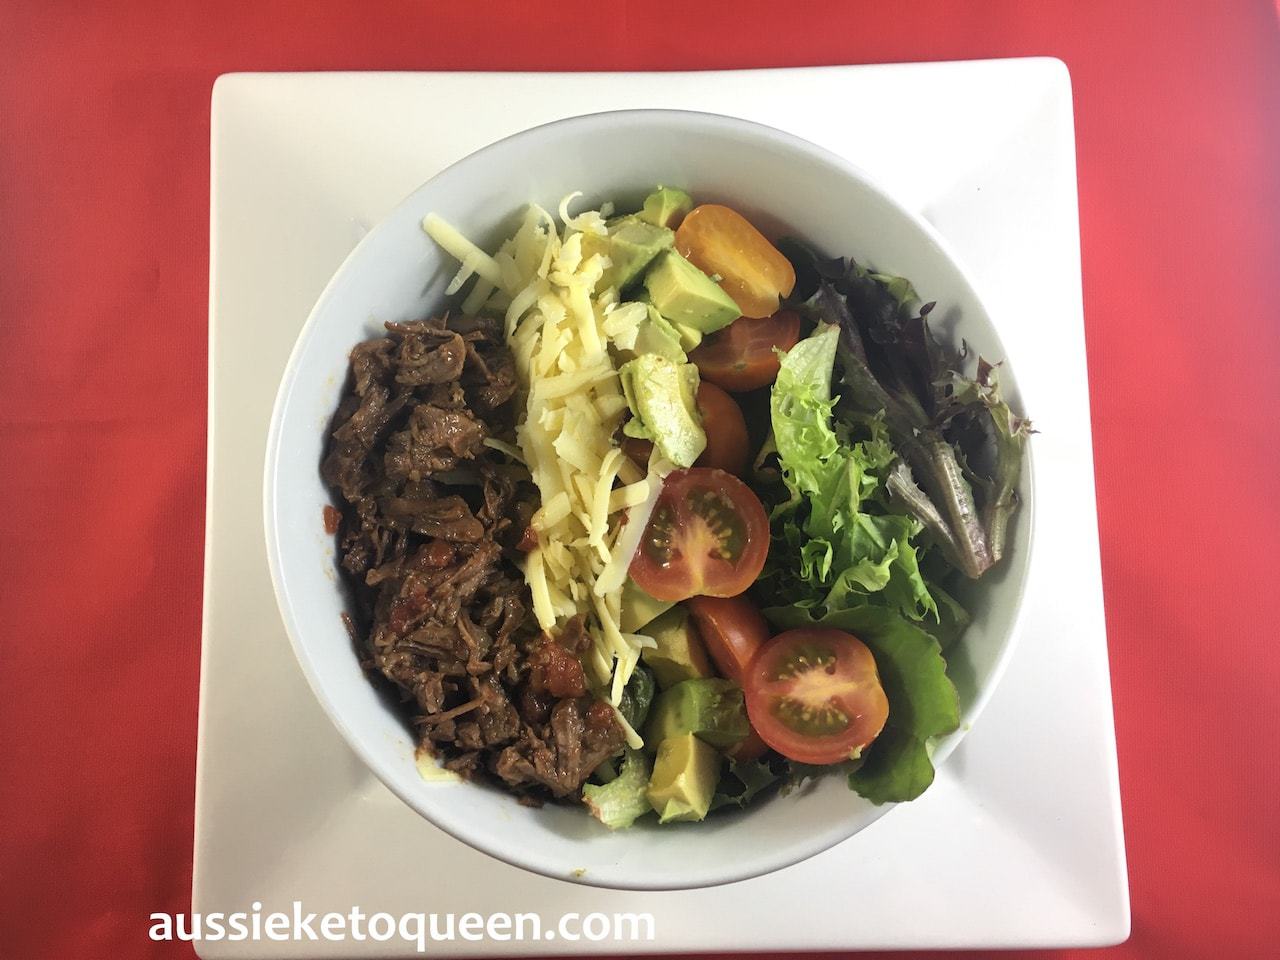 Slow Cooked Mexican Beef Fajita Salad by Aussie Keto Queen. Slow cooked for 8 hours, this spiced beef becomes meltingly tender. Combined with fresh salad, sour cream and cheese, a quick weeknight meal is on the table in no time. LCHF